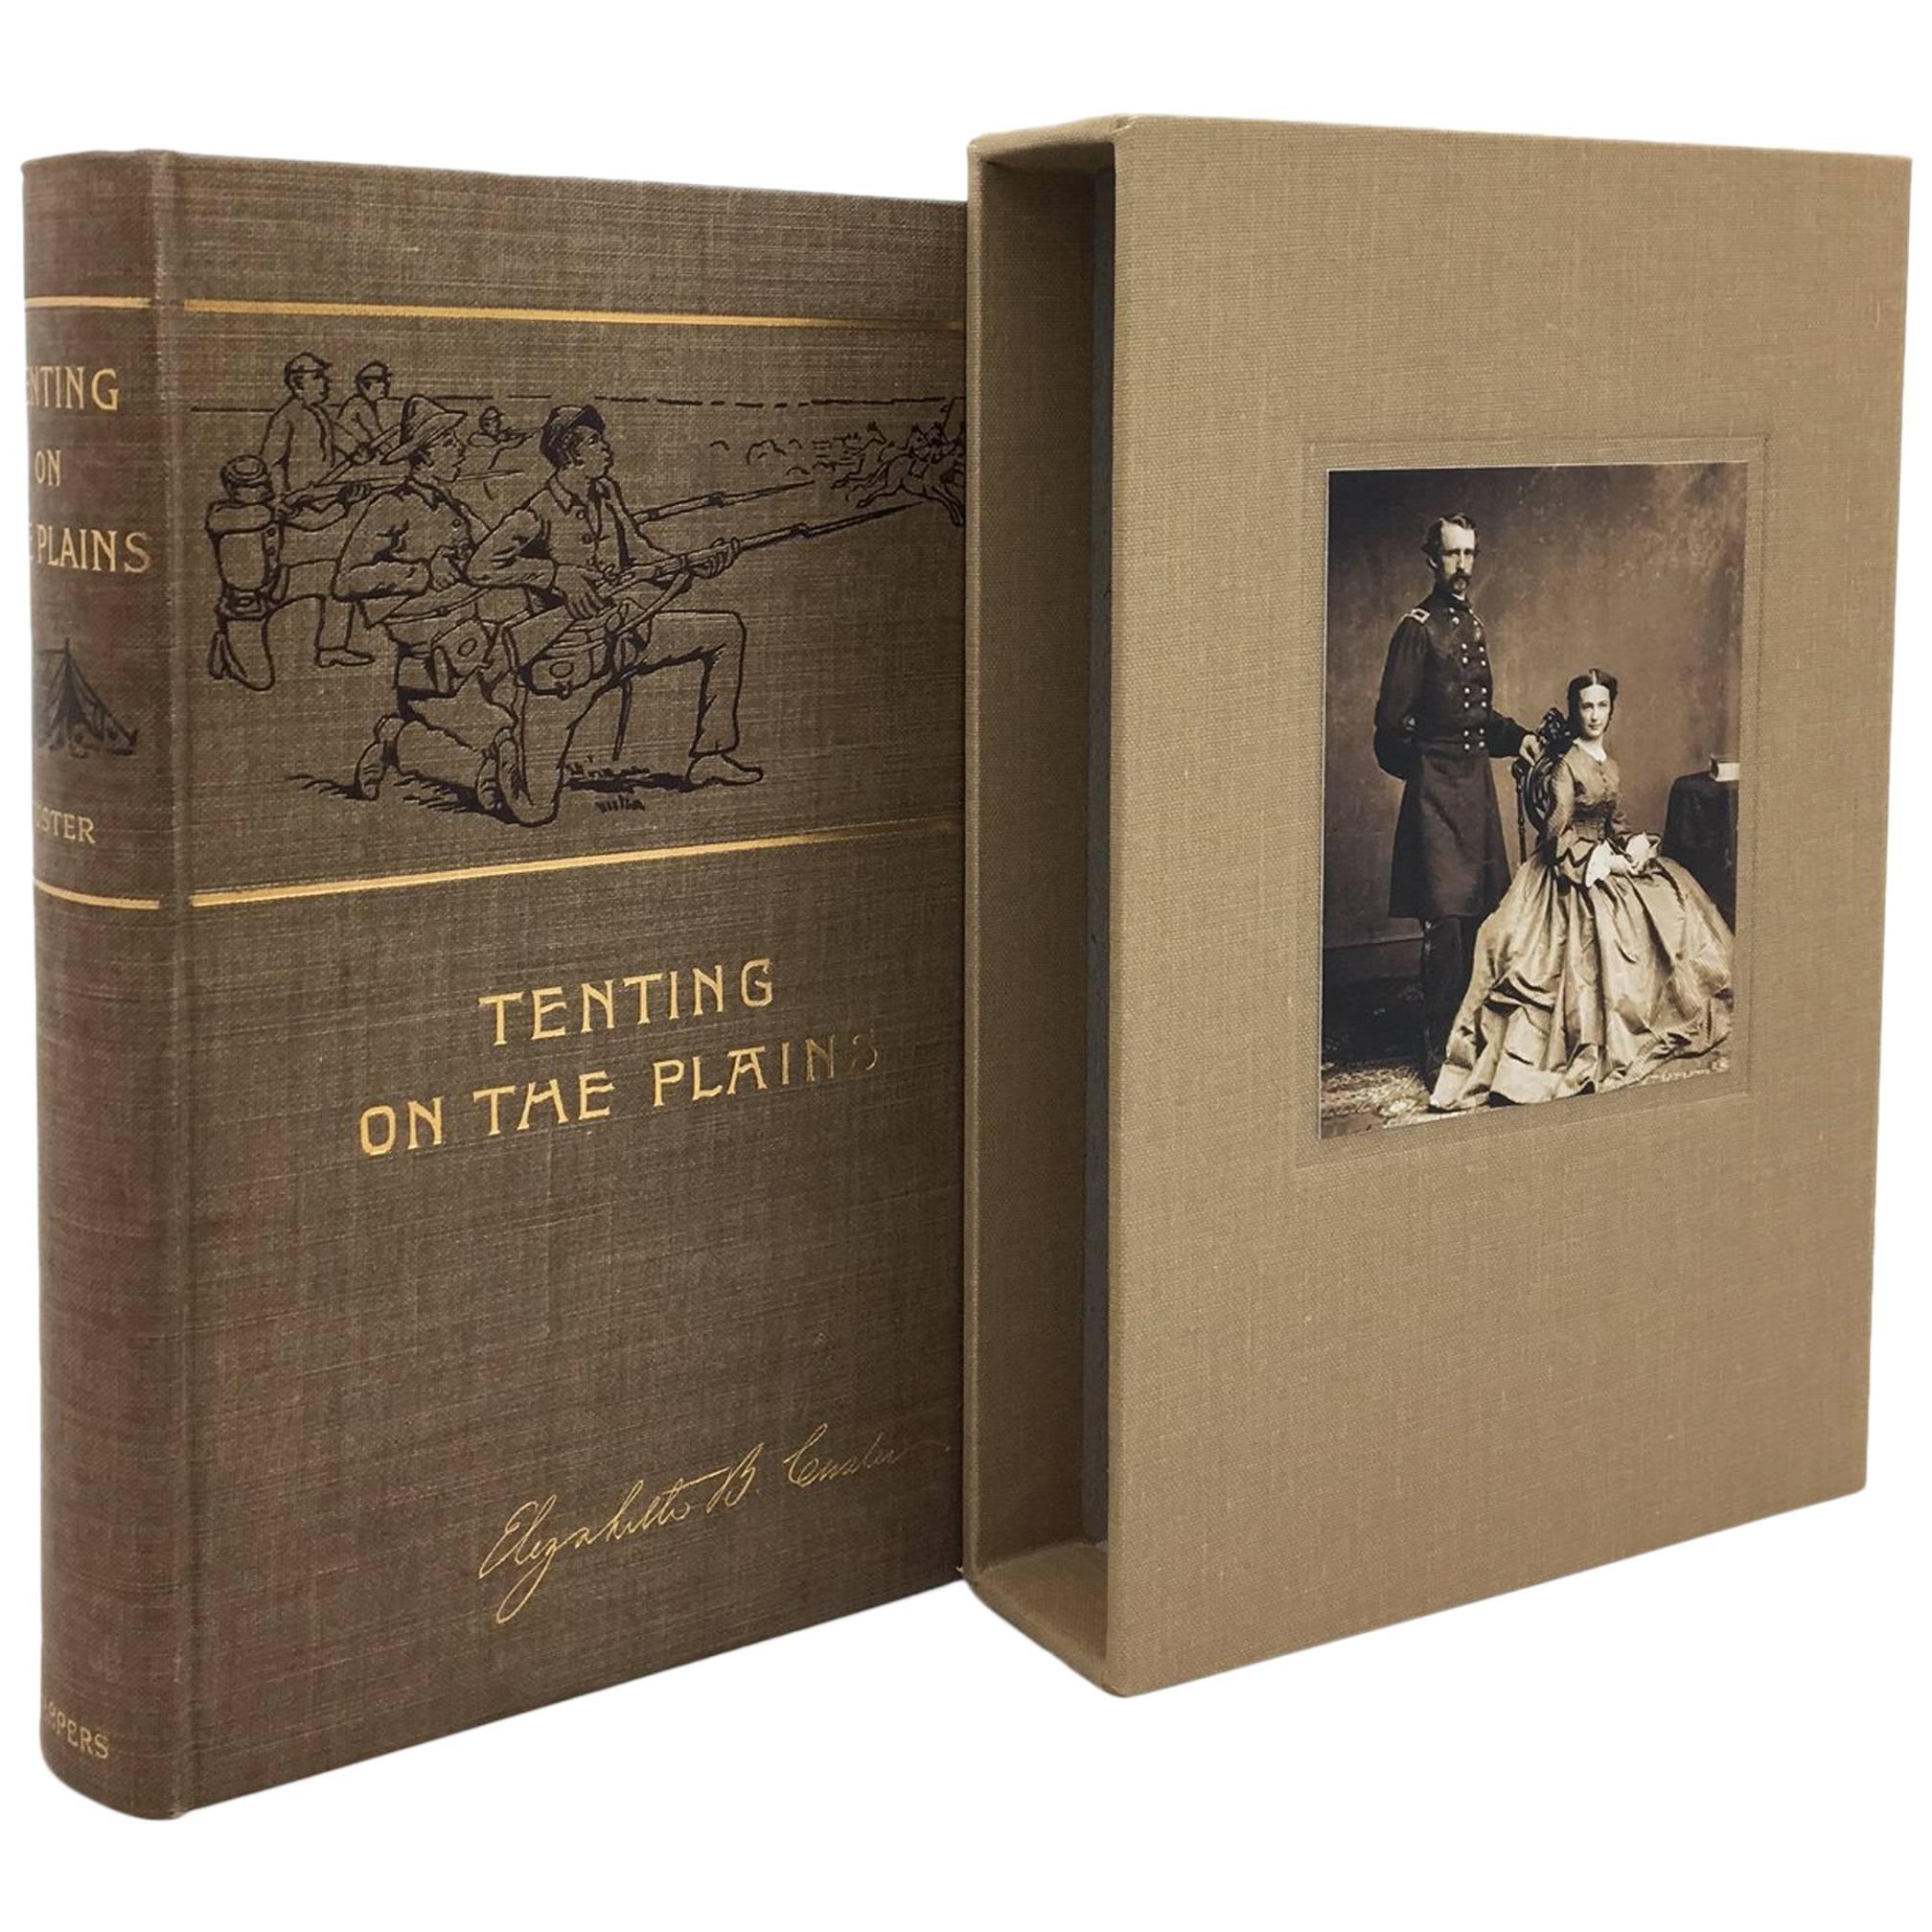 Tenting on the Plains by Elizabeth Custer, 1st Edition, 1887